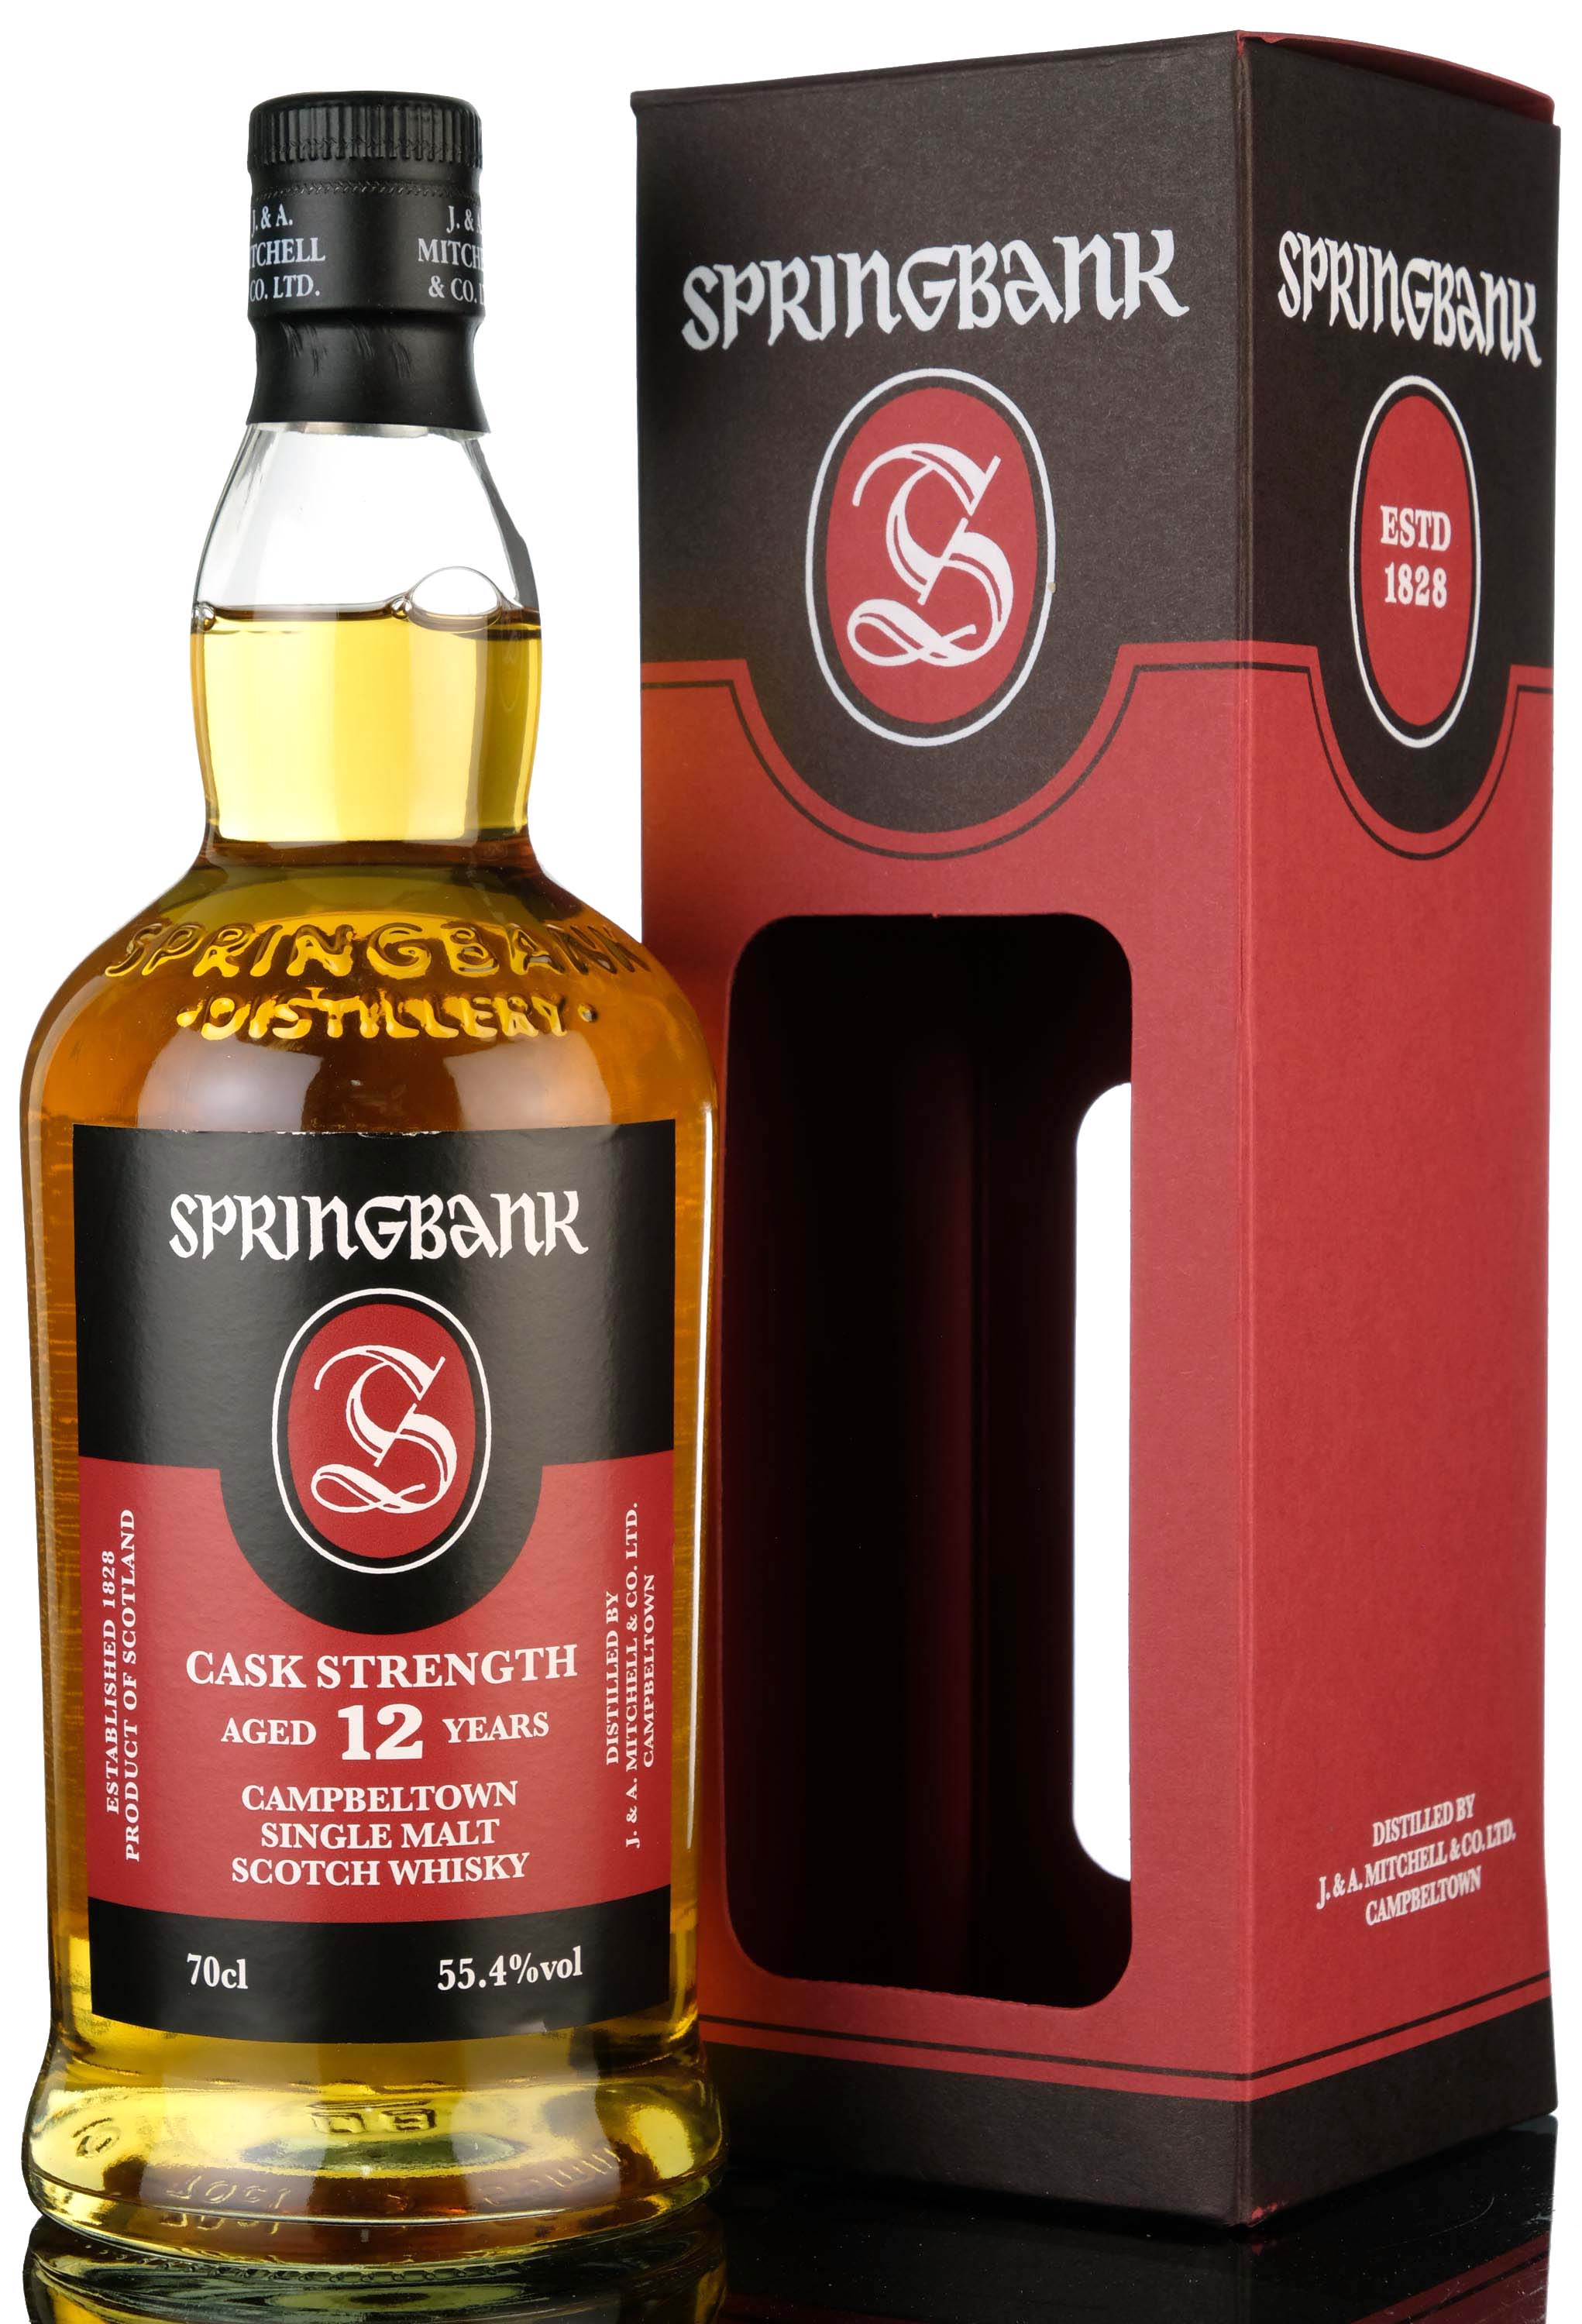 Springbank 12 Year Old - Cask Strength 56.3% - 2016 Release